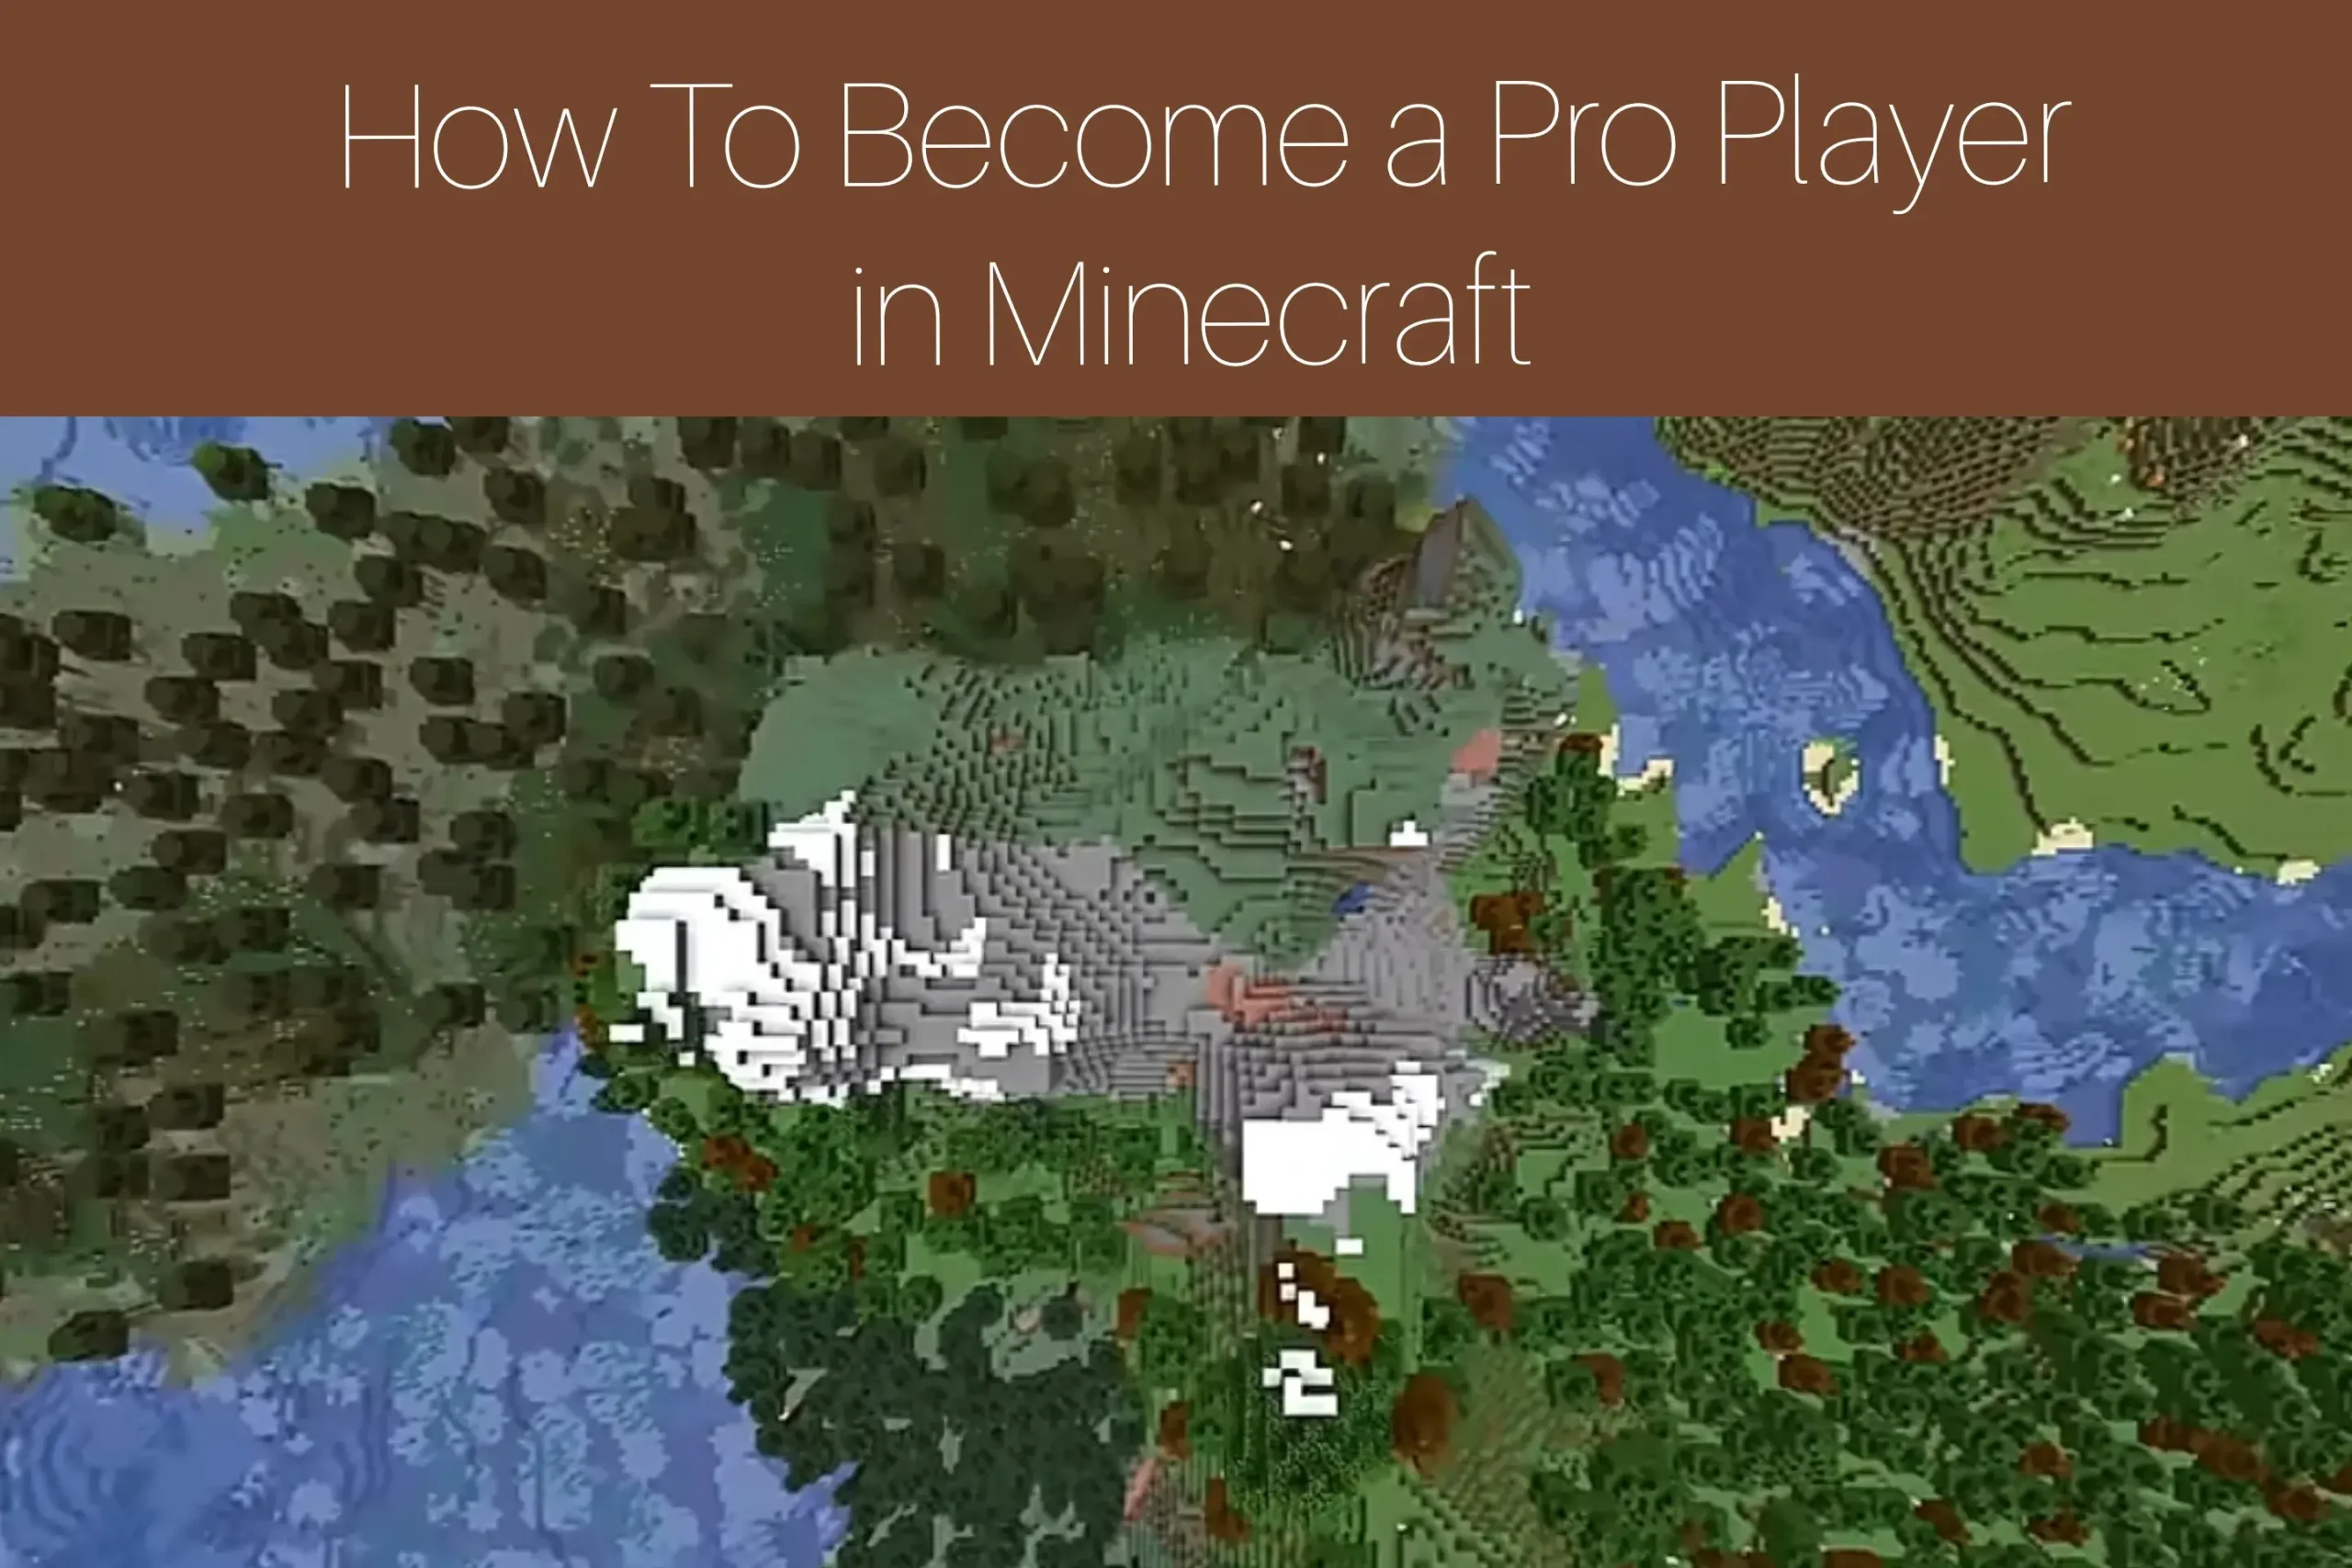 How to Become a Pro Player in Minecraft